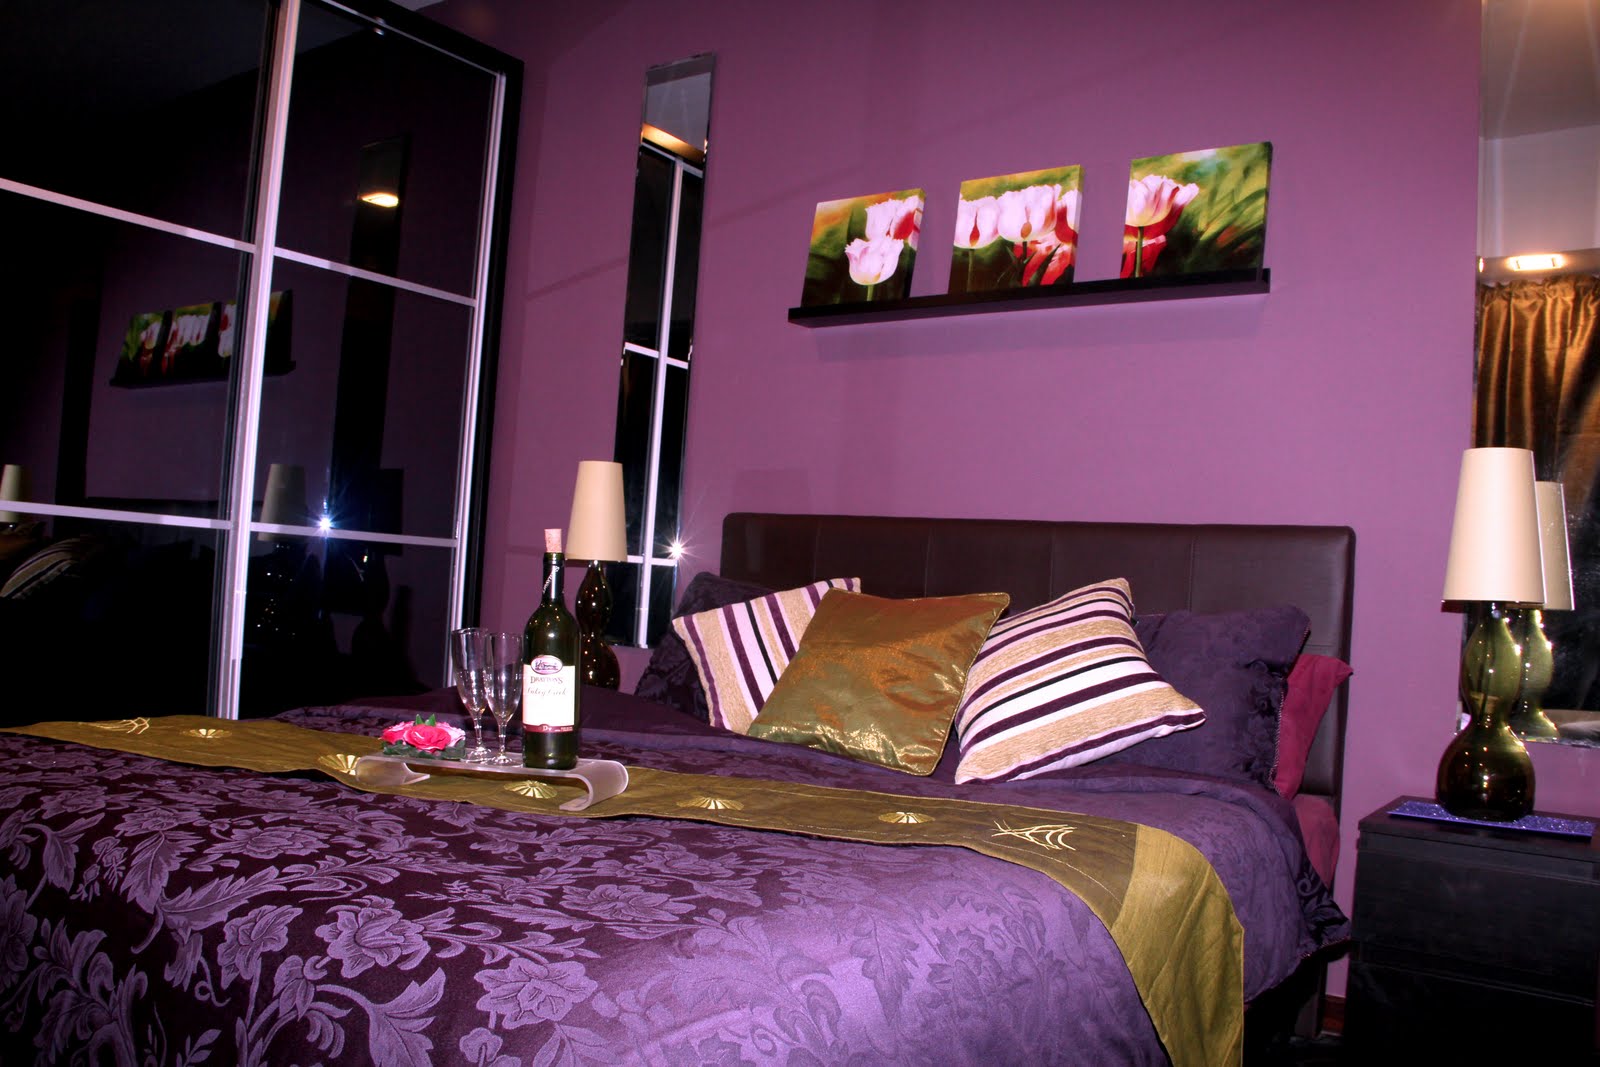 Purple Bedroom For Dramatic Purple Bedroom Ideas Applied For Simple And Minimalist Bedroom Paint Equipped With Amazing Table Lamp And Wall Art Decorations Bedroom 26 Bewitching Purple Bedroom Design For Comfort Decoration Ideas